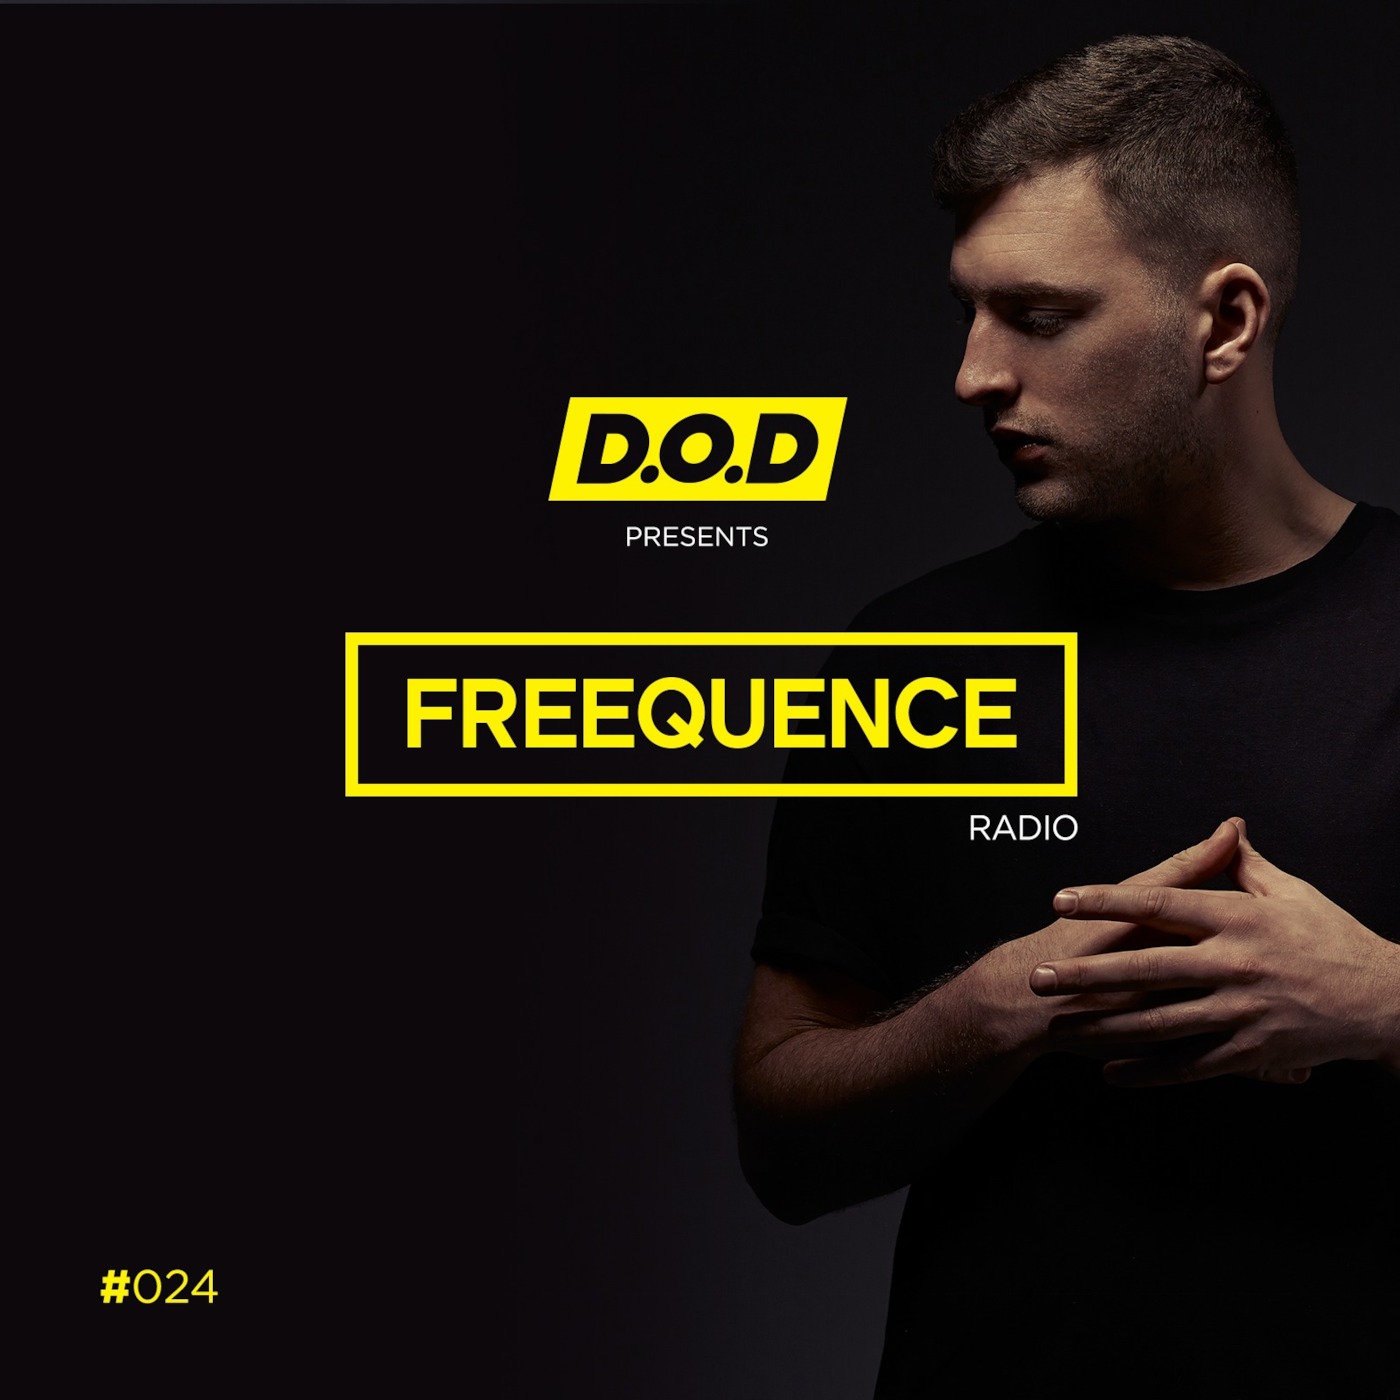 #FREEQUENCE Radio with D.O.D #024